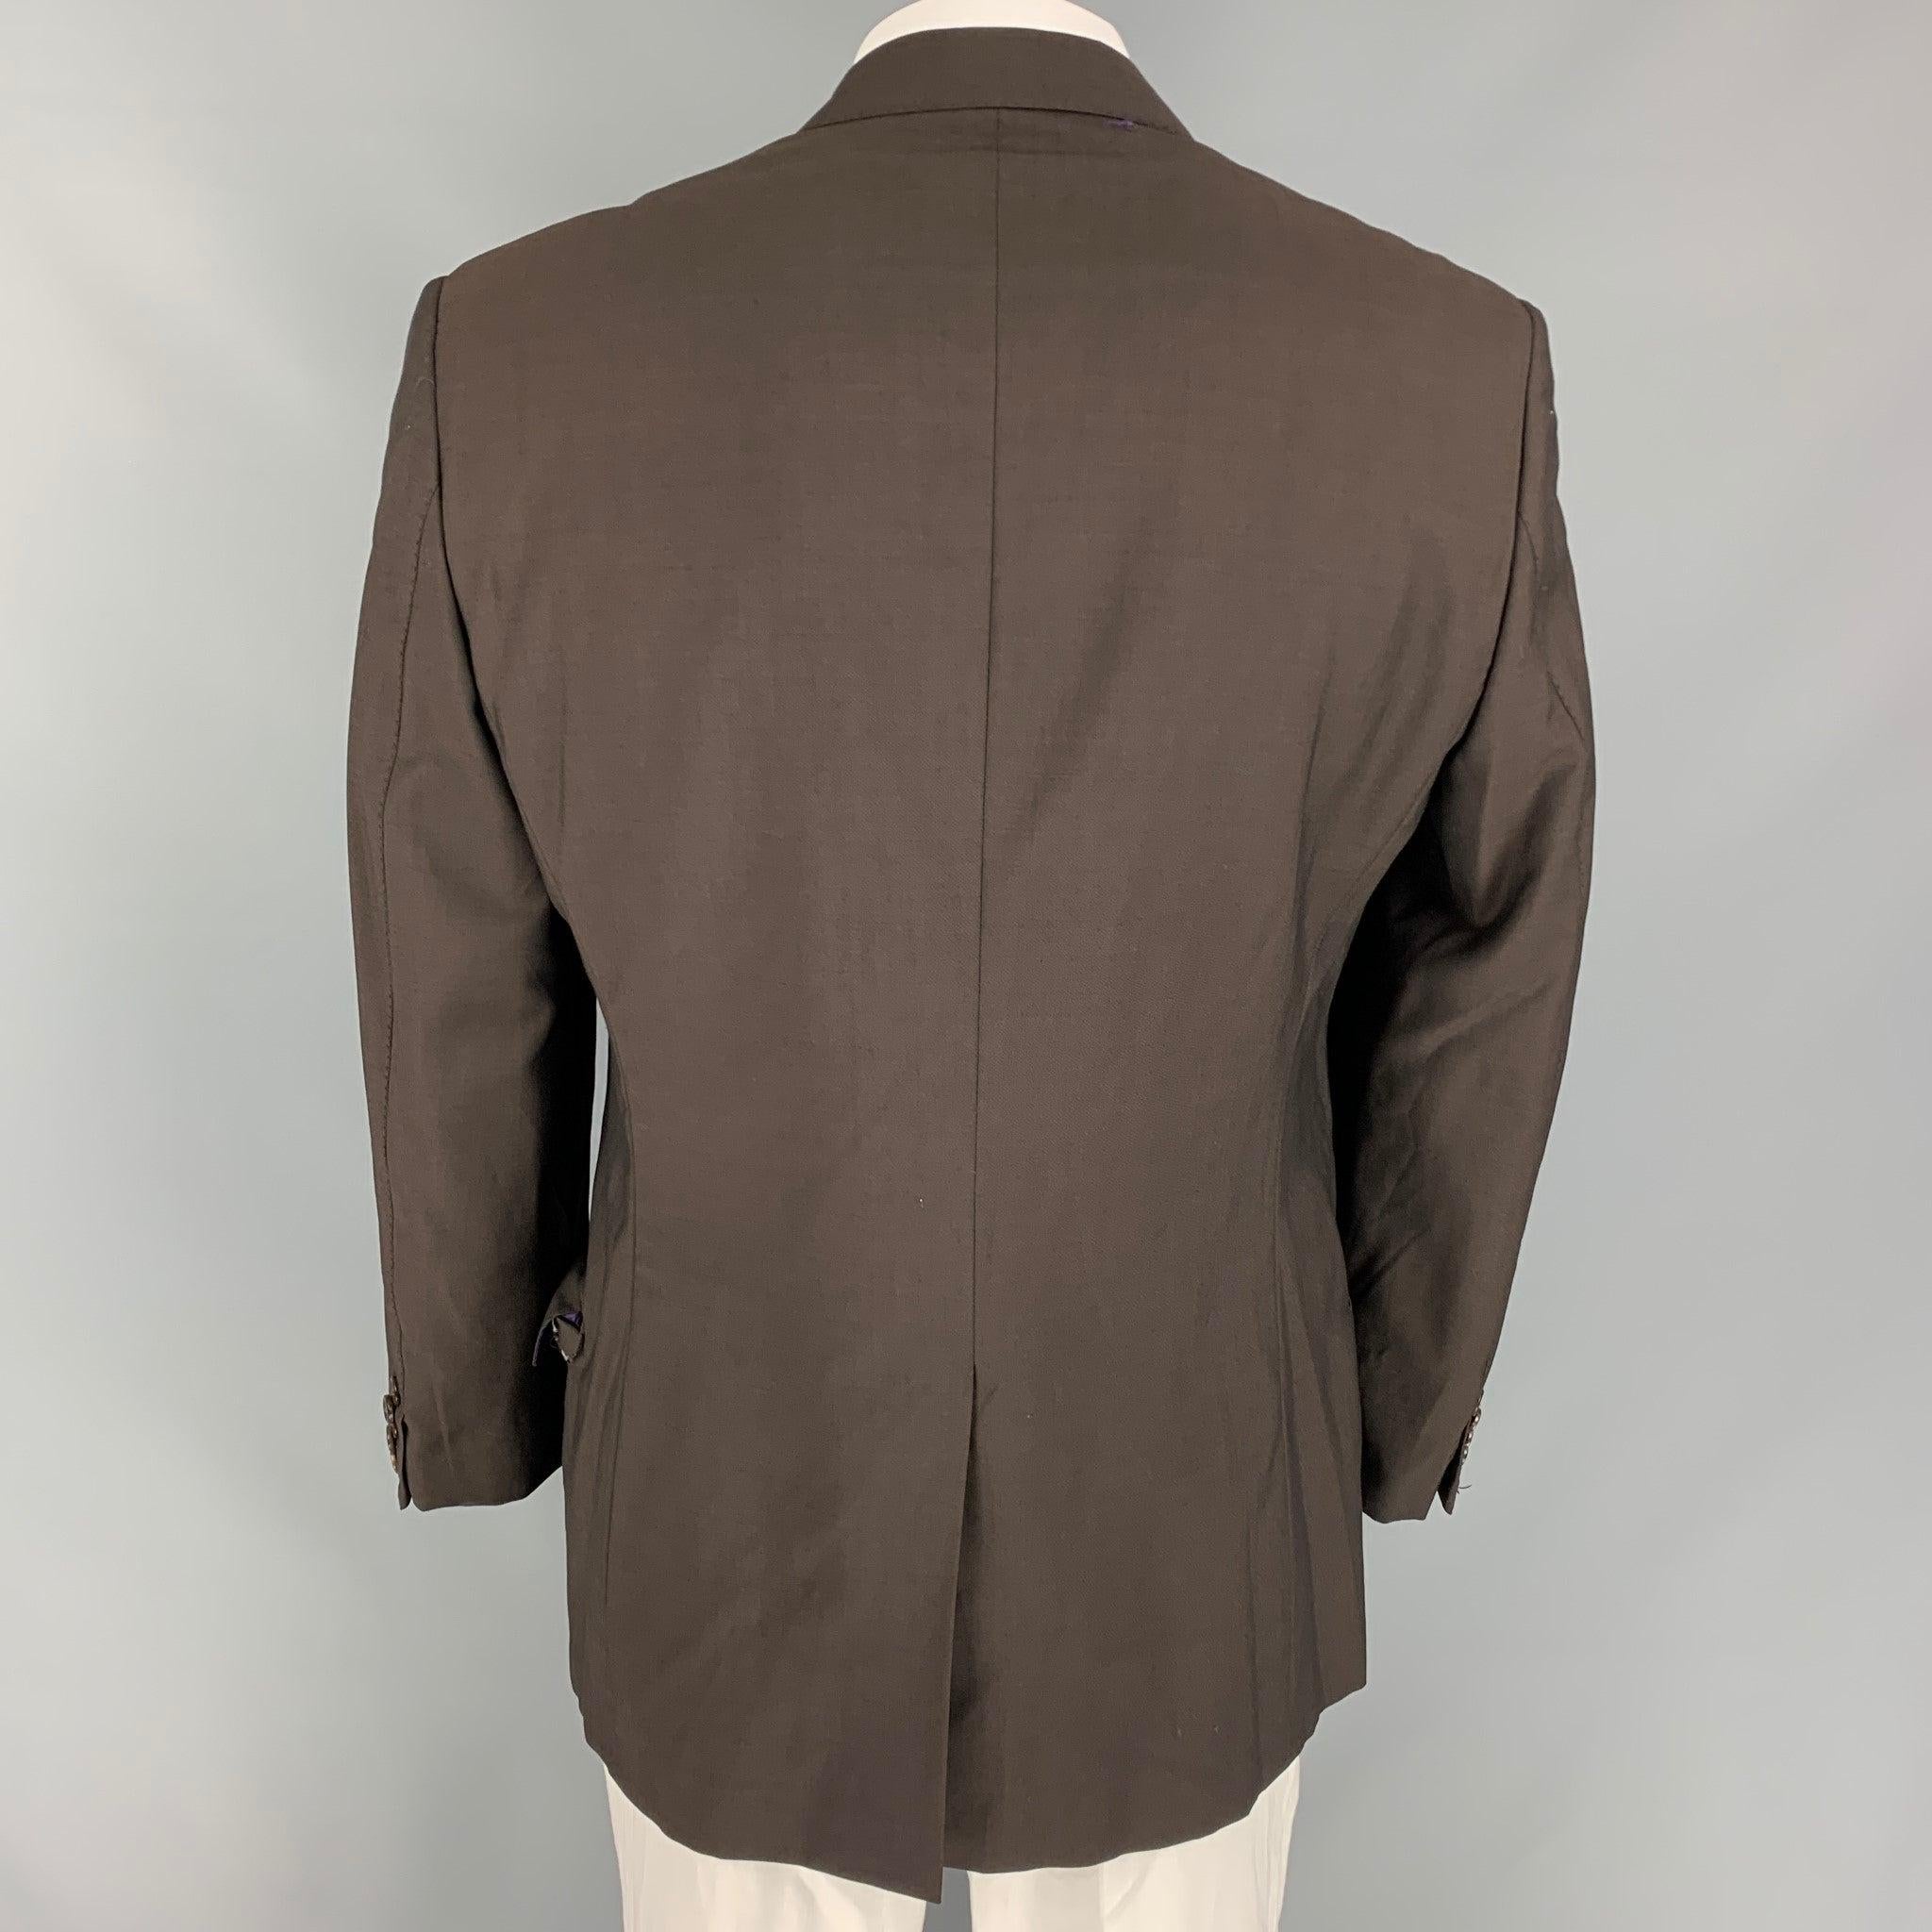 PAUL SMITH Size 44 Brown Wool / Mohair Single Breasted Sport Coat In Good Condition For Sale In San Francisco, CA